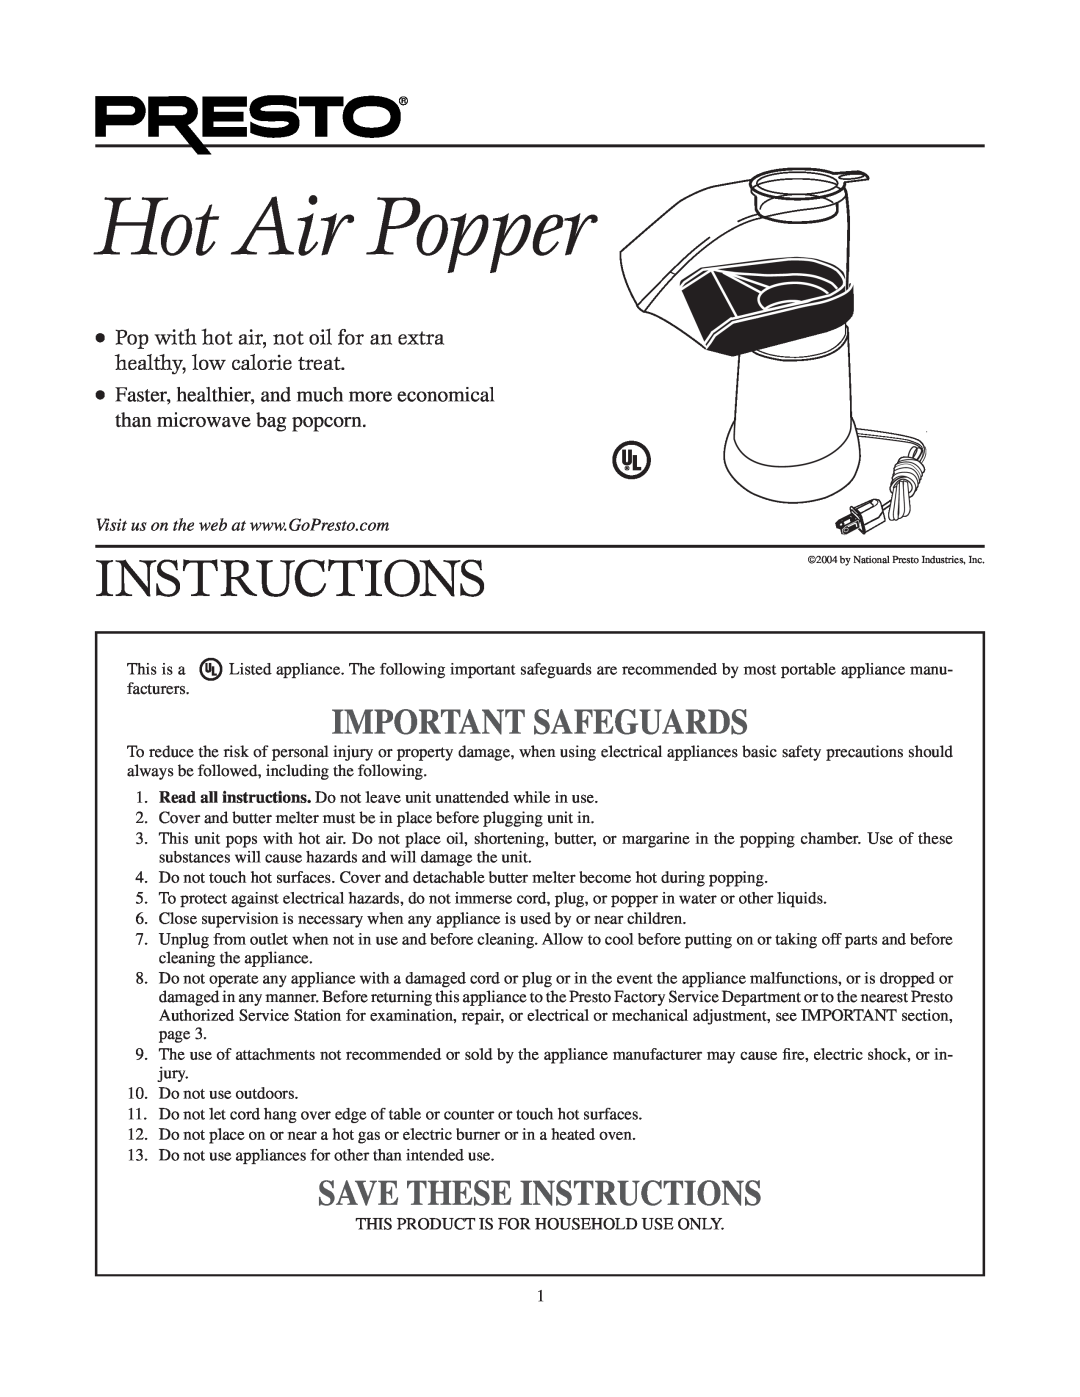 Presto manual Hot Air Popper, Important Safeguards, Save These Instructions 